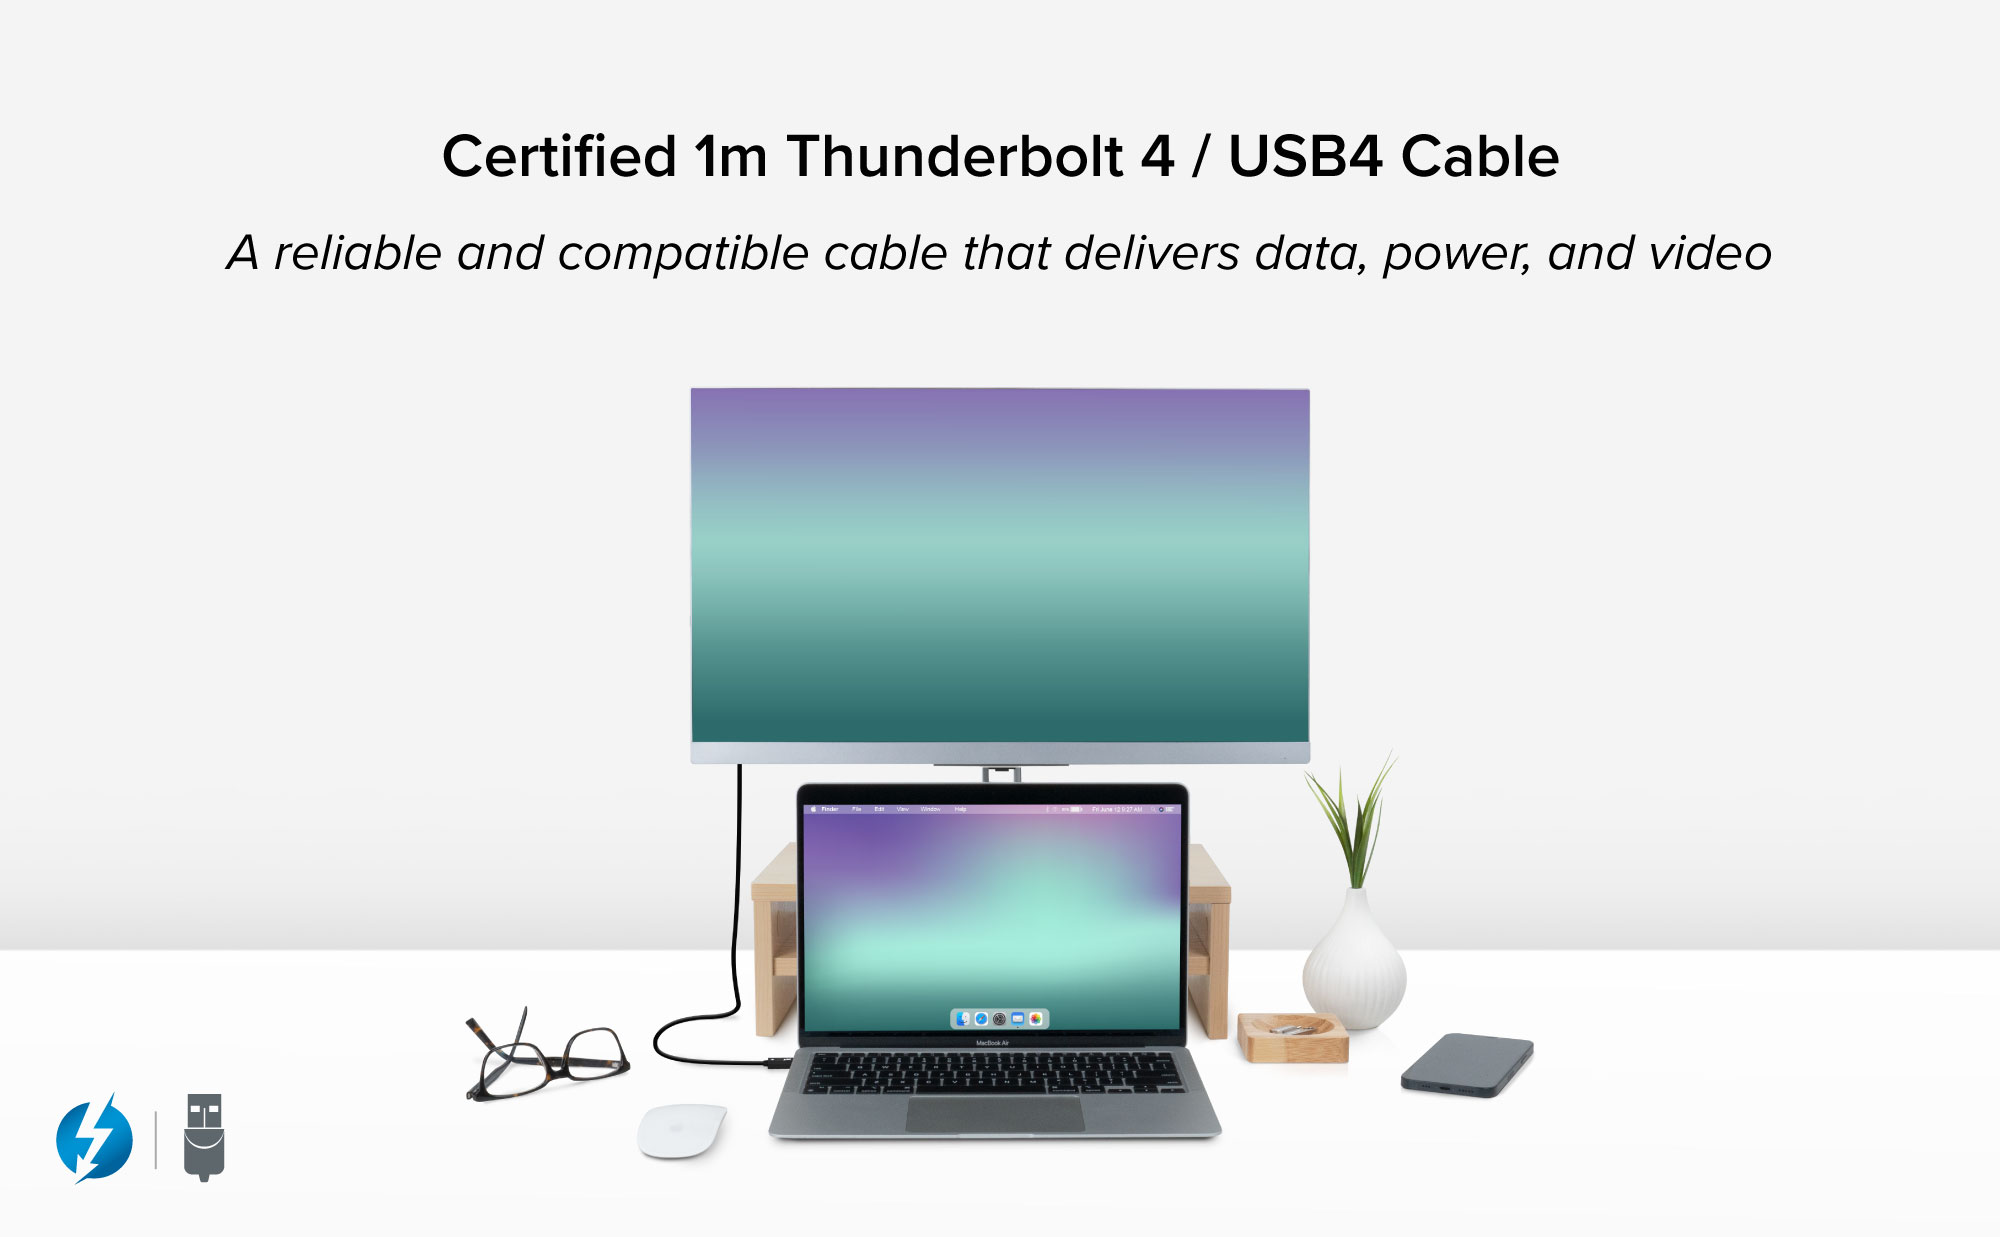 Certified 1m Thunderbolt 4 / USB4 Cable